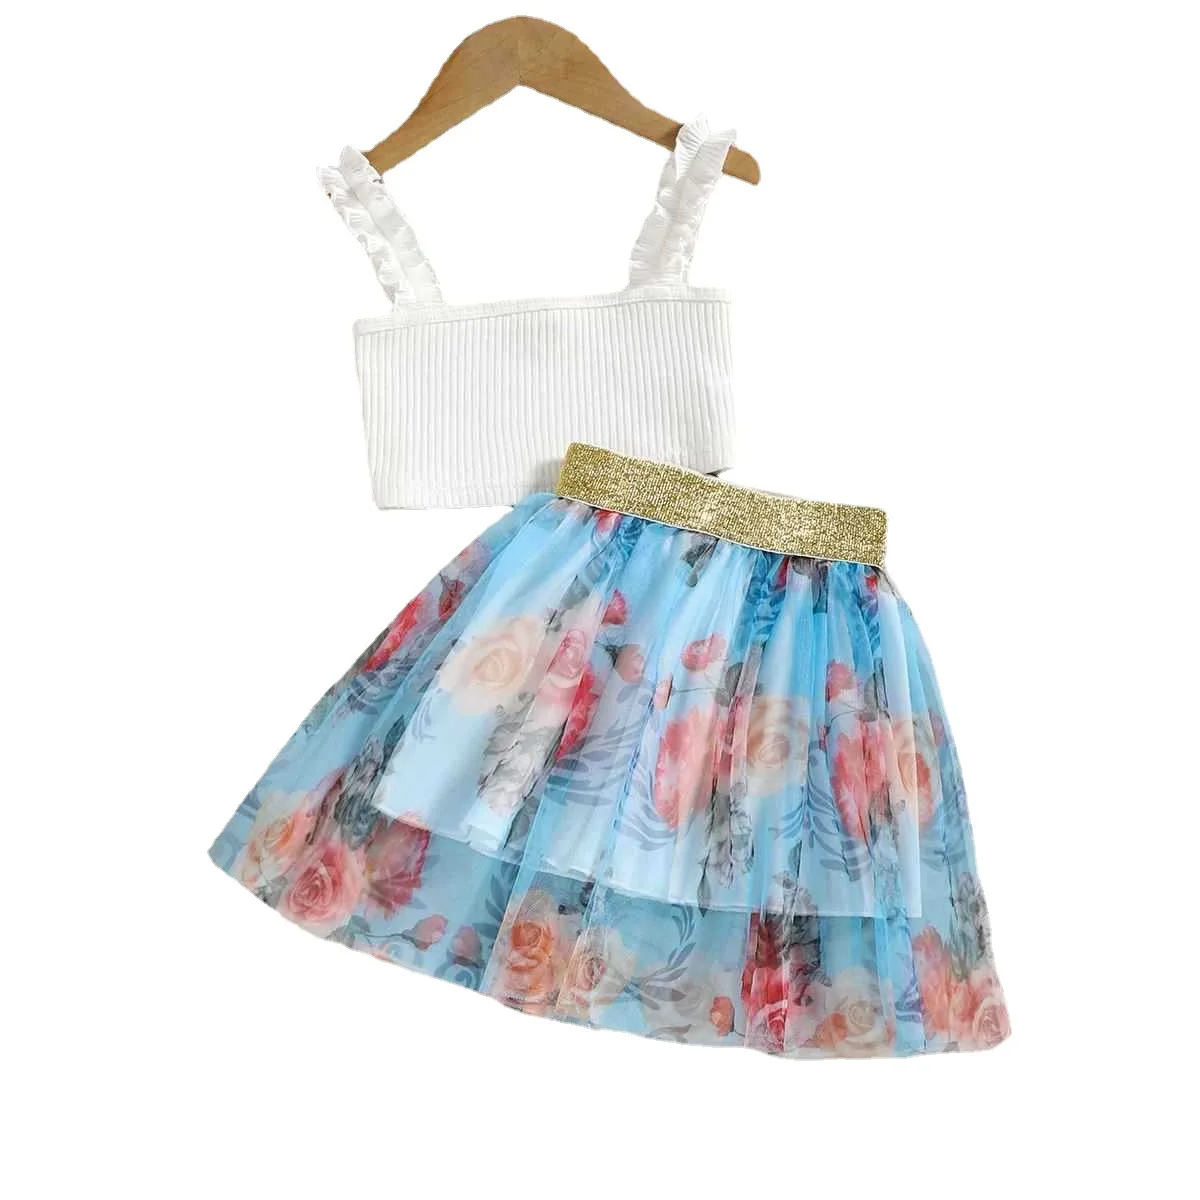 2023 Summer Bohemian Style Flower Print Baby Clothing Sets Suspender Top Gauze Skirt Two-piece Girls Clothing Outfits